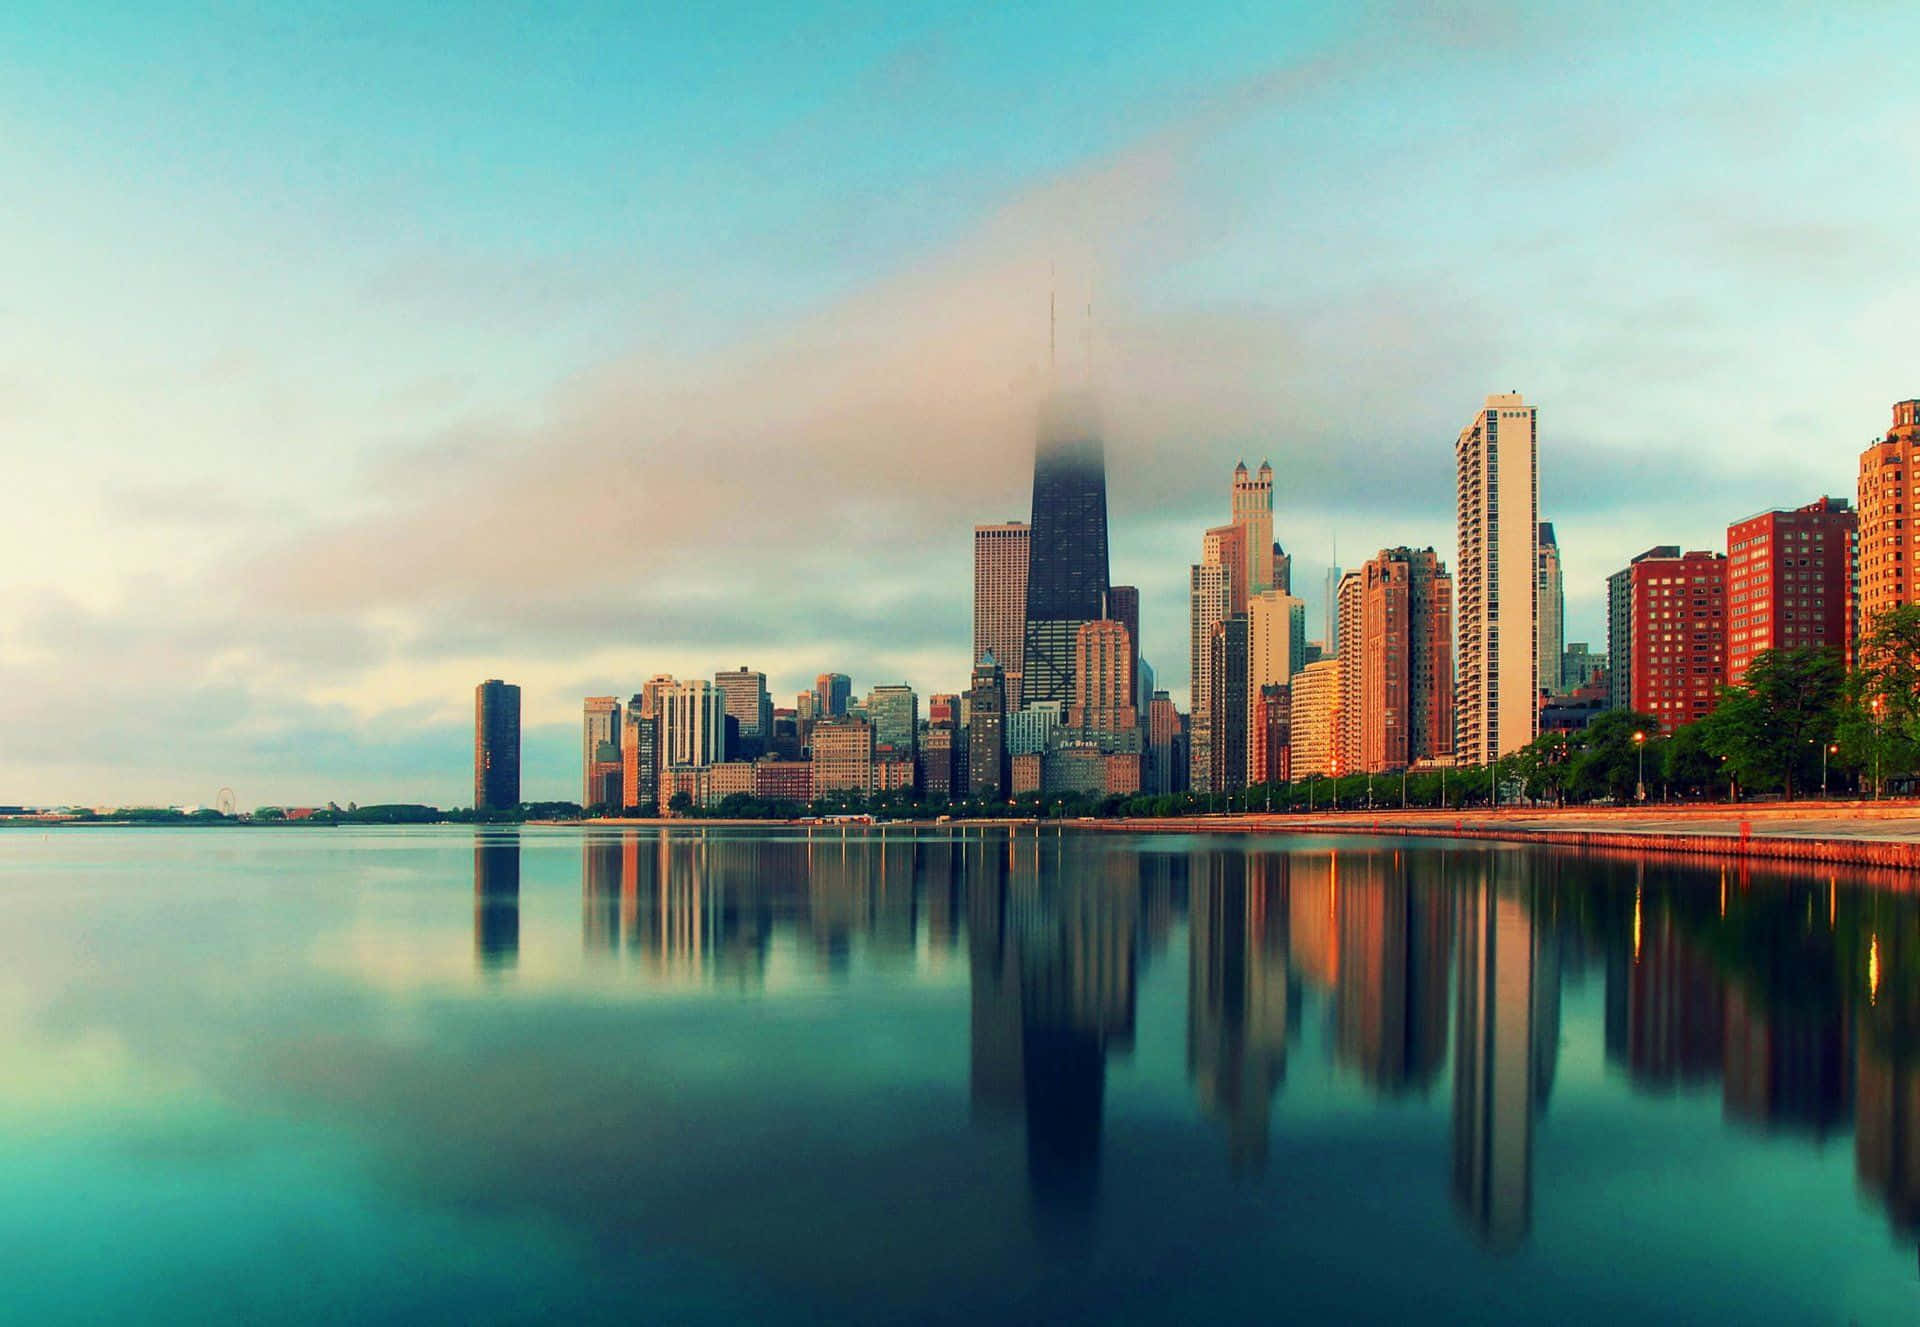 "The Magnificent Chicago Skyline"